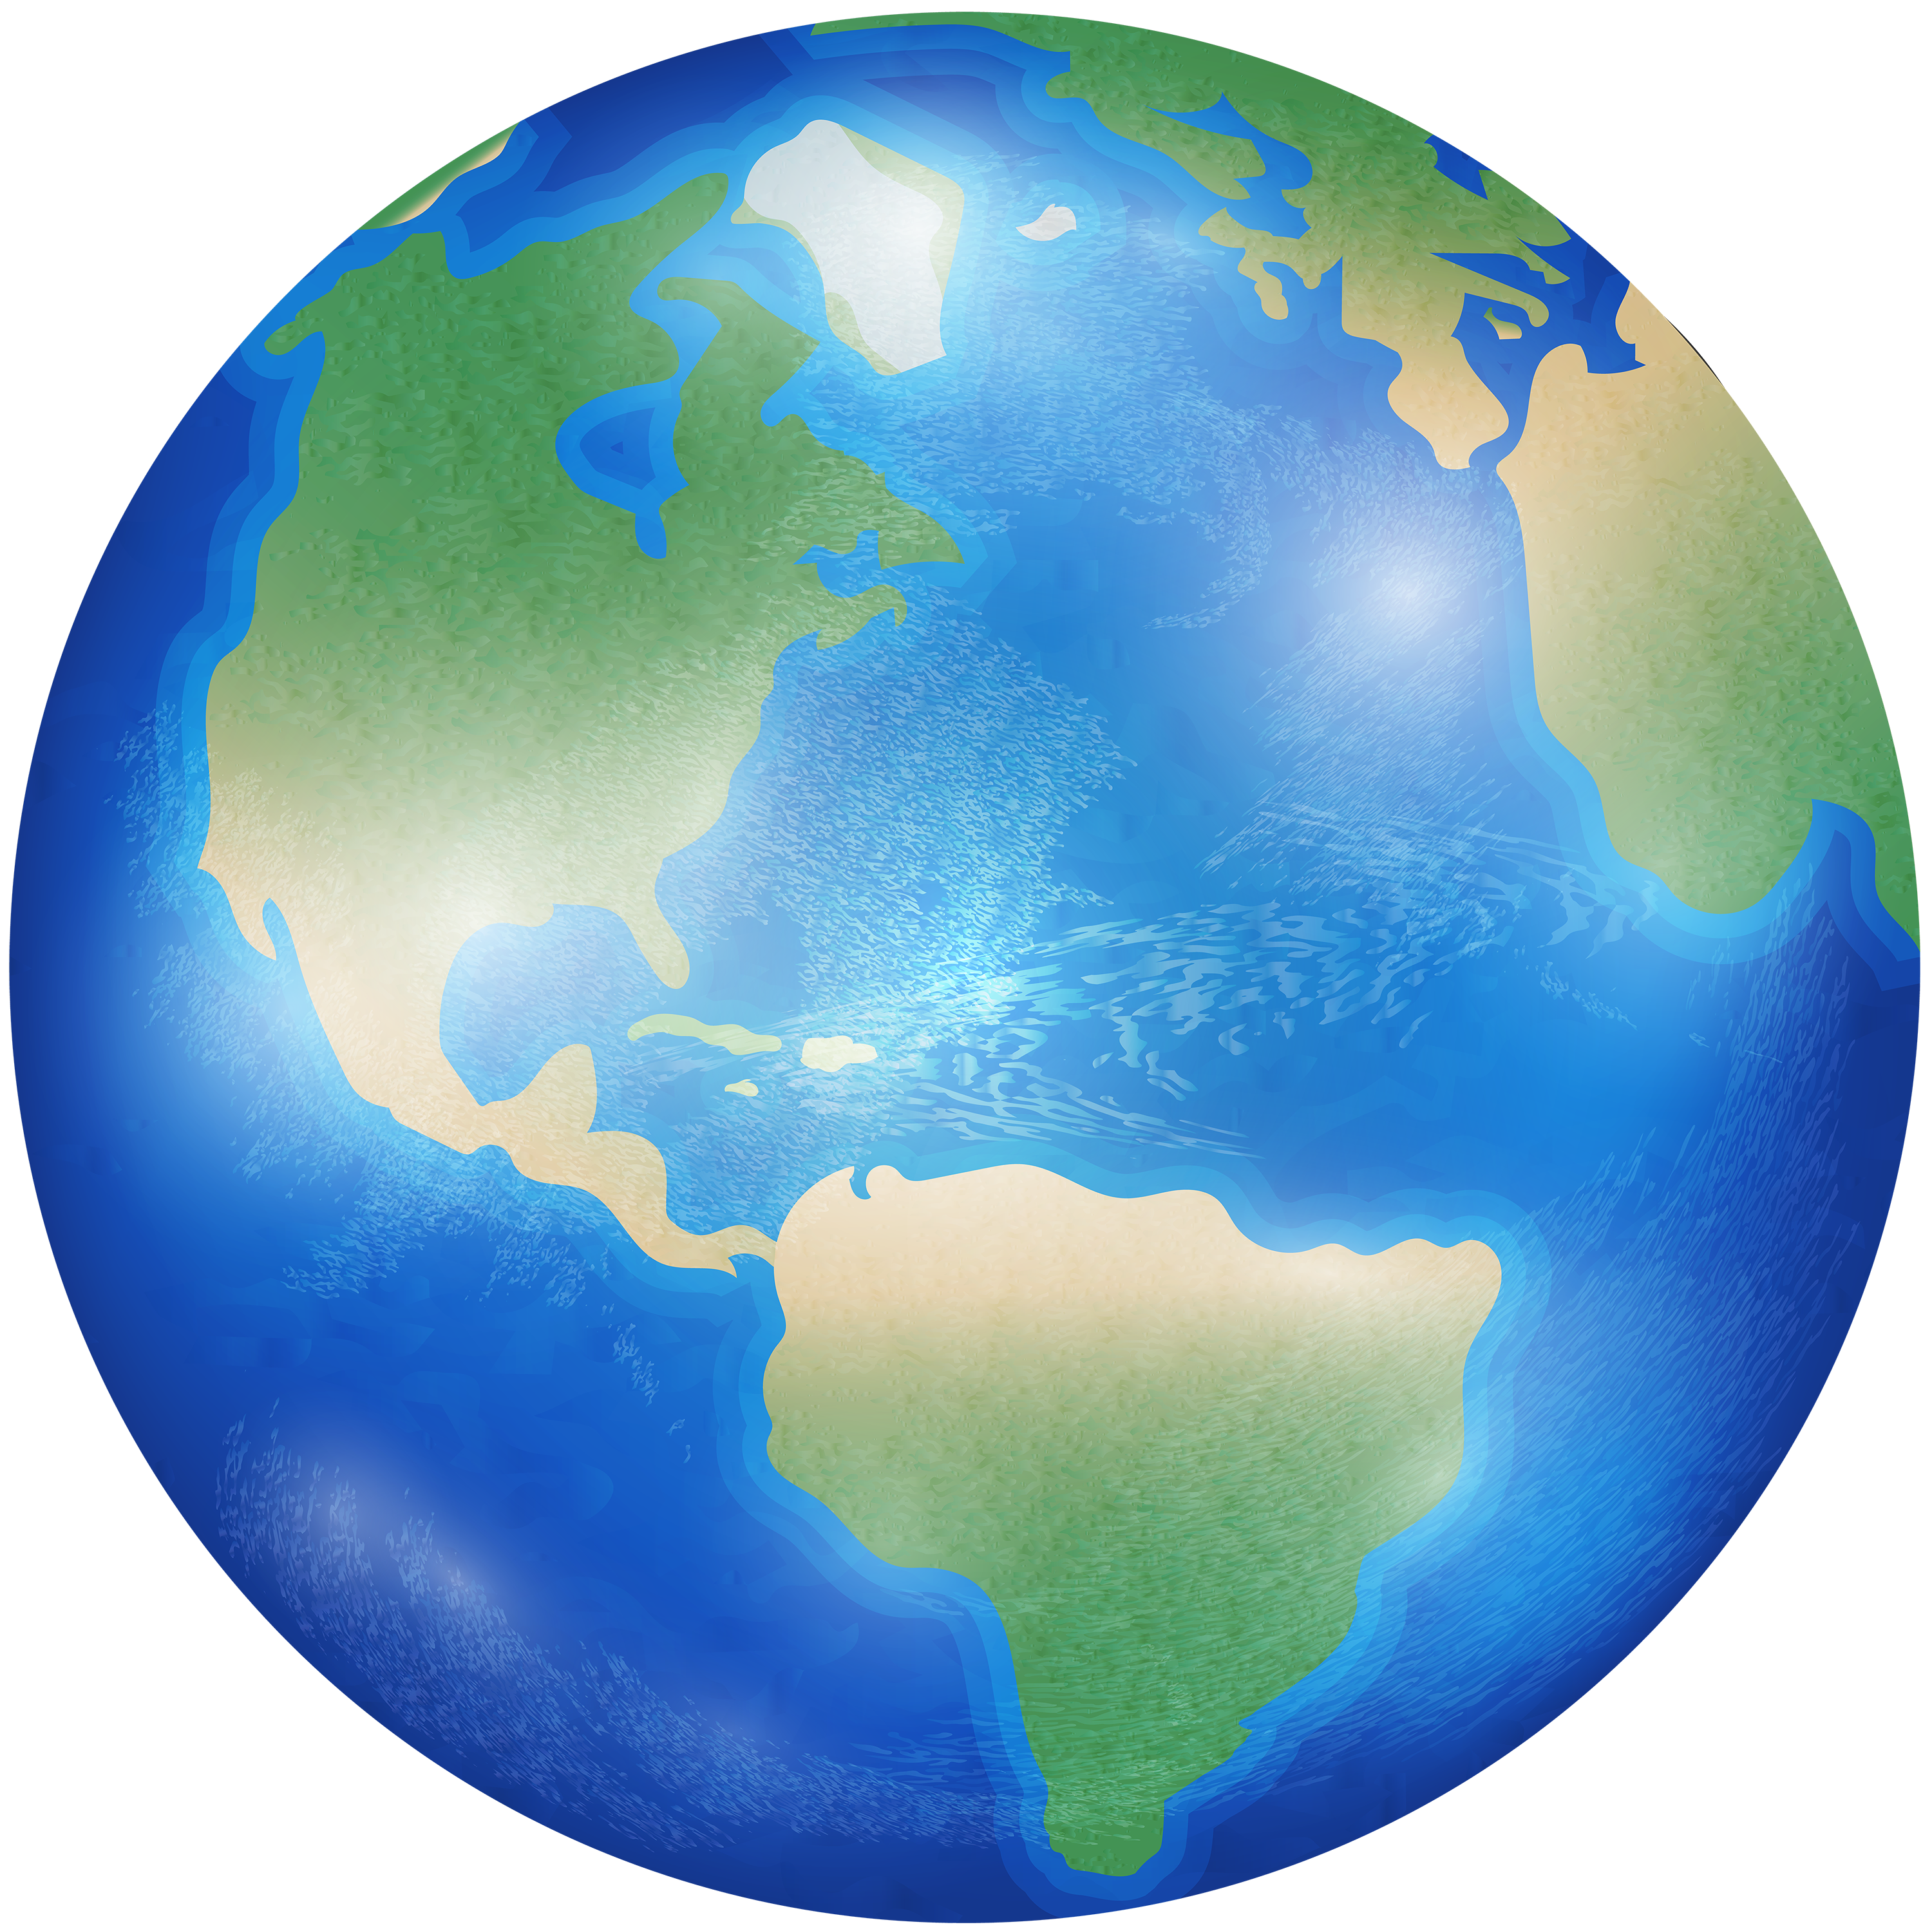 Planet Earth Transparent PNG, Flat Earth, Earth Clipart Pictures - Free